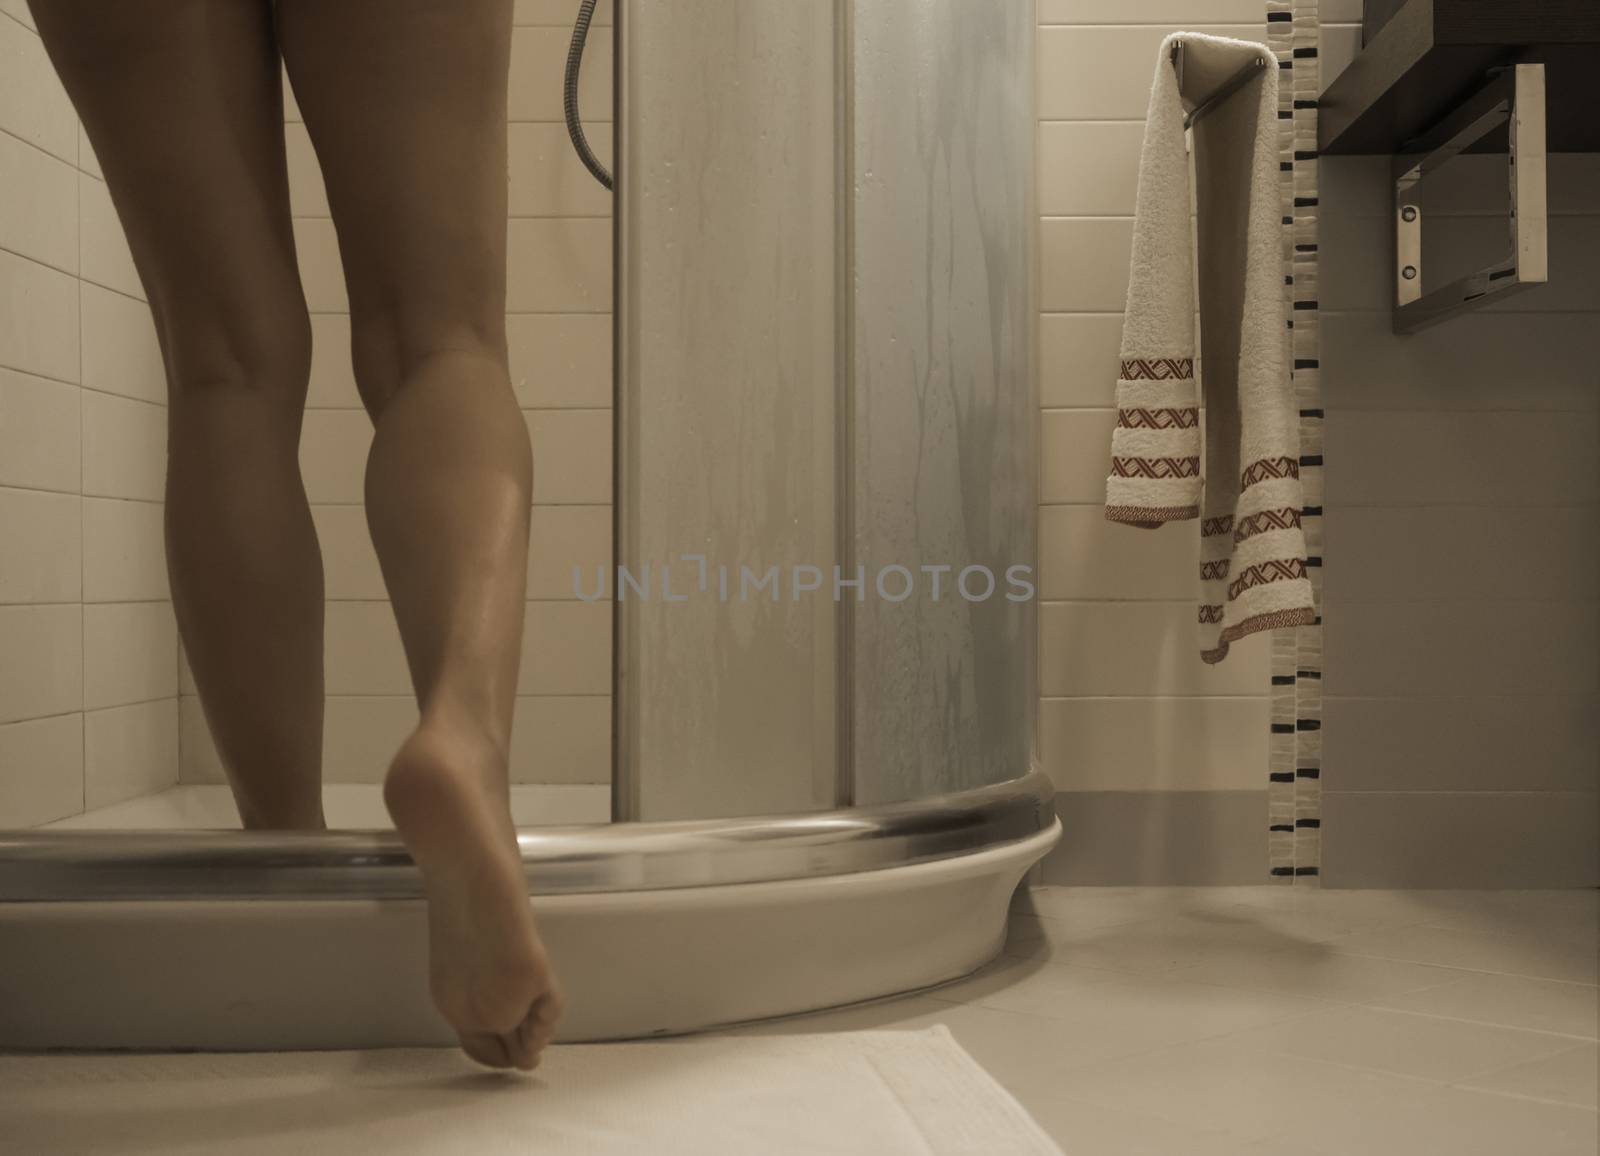 Sexy naked woman's legs entering the foggy glass shower cabin in her modern design bathroom by robbyfontanesi